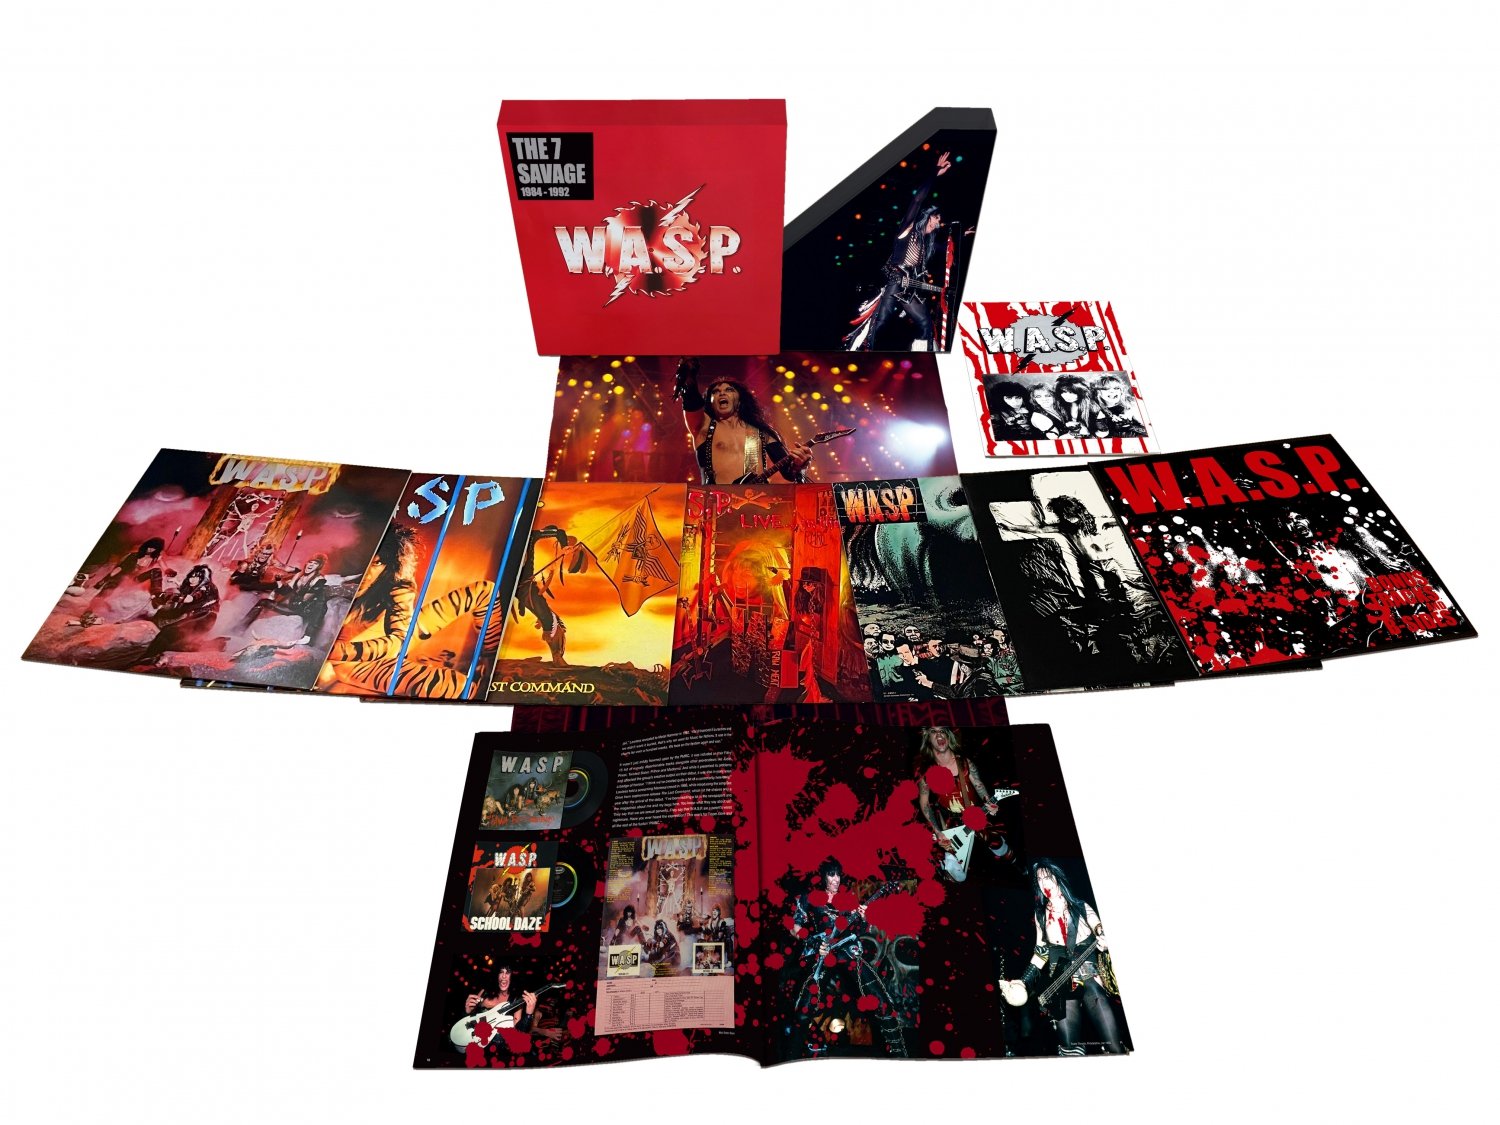 CD Shop - W.A.S.P. THE 7 SAVAGE: 1984-1992